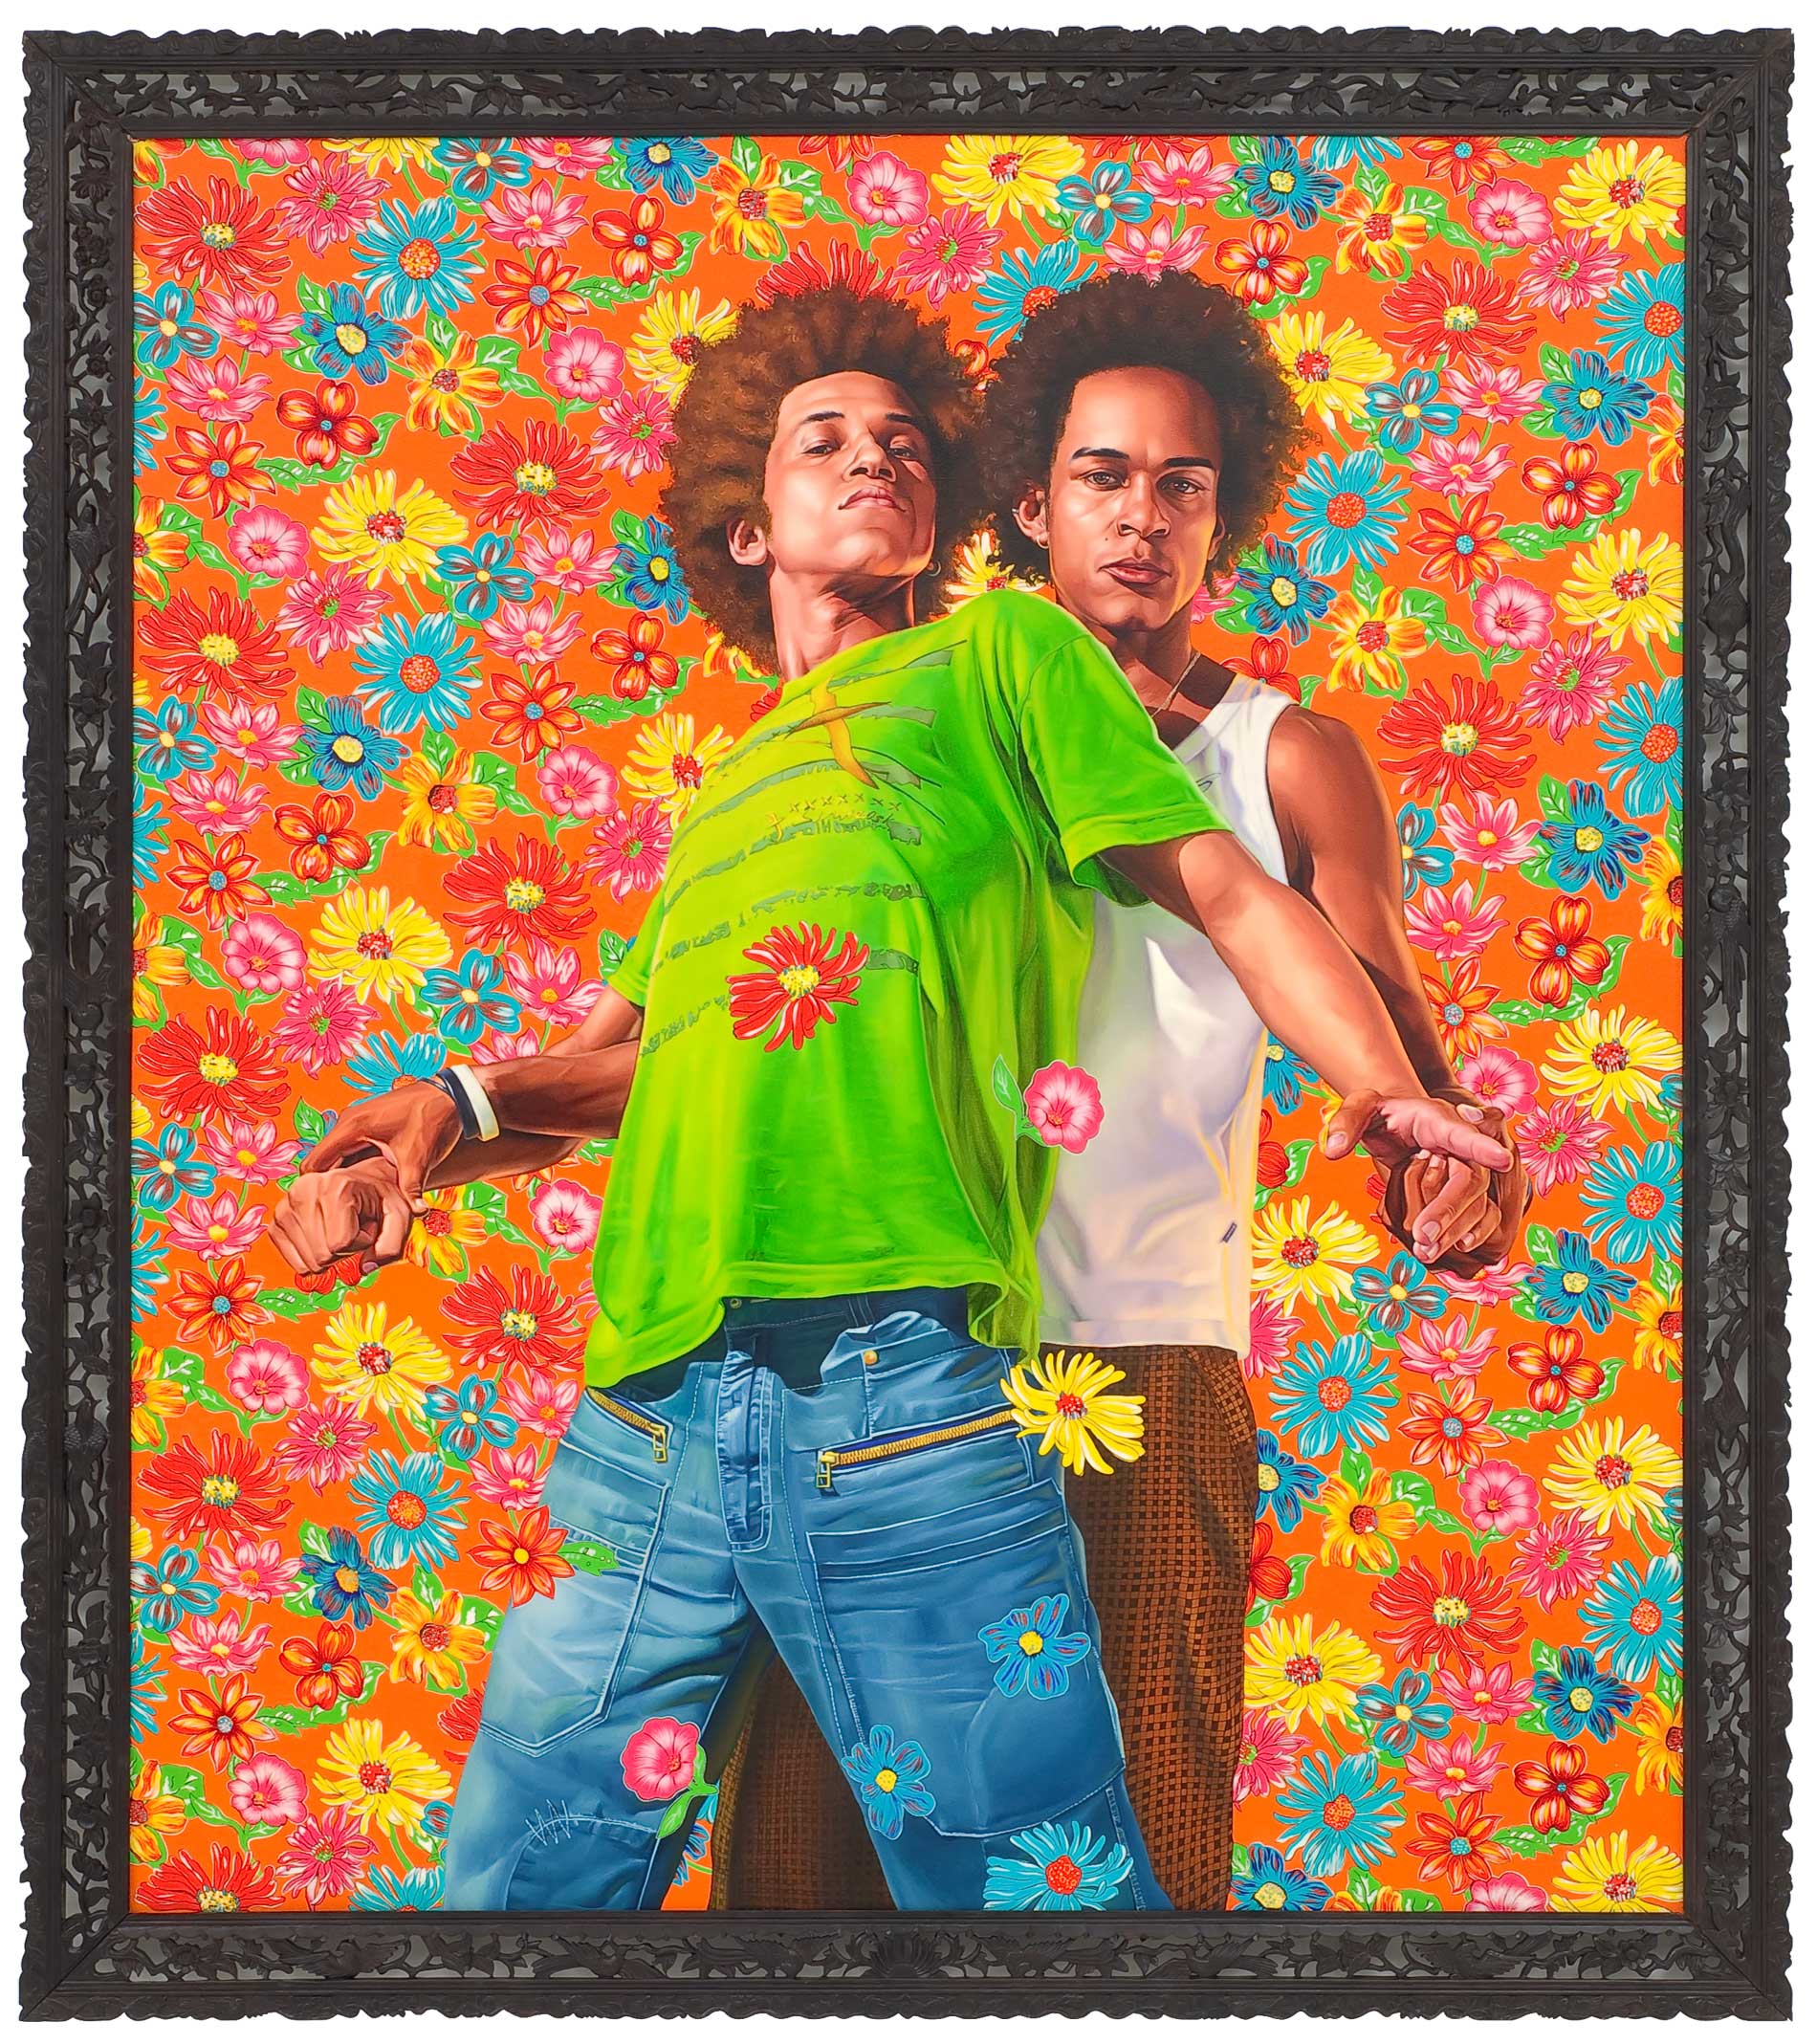 Kehinde Wiley | The World Stage: Brazil | Marechal Floriano Peixoto, 2009 Oil on Canvas. | 12